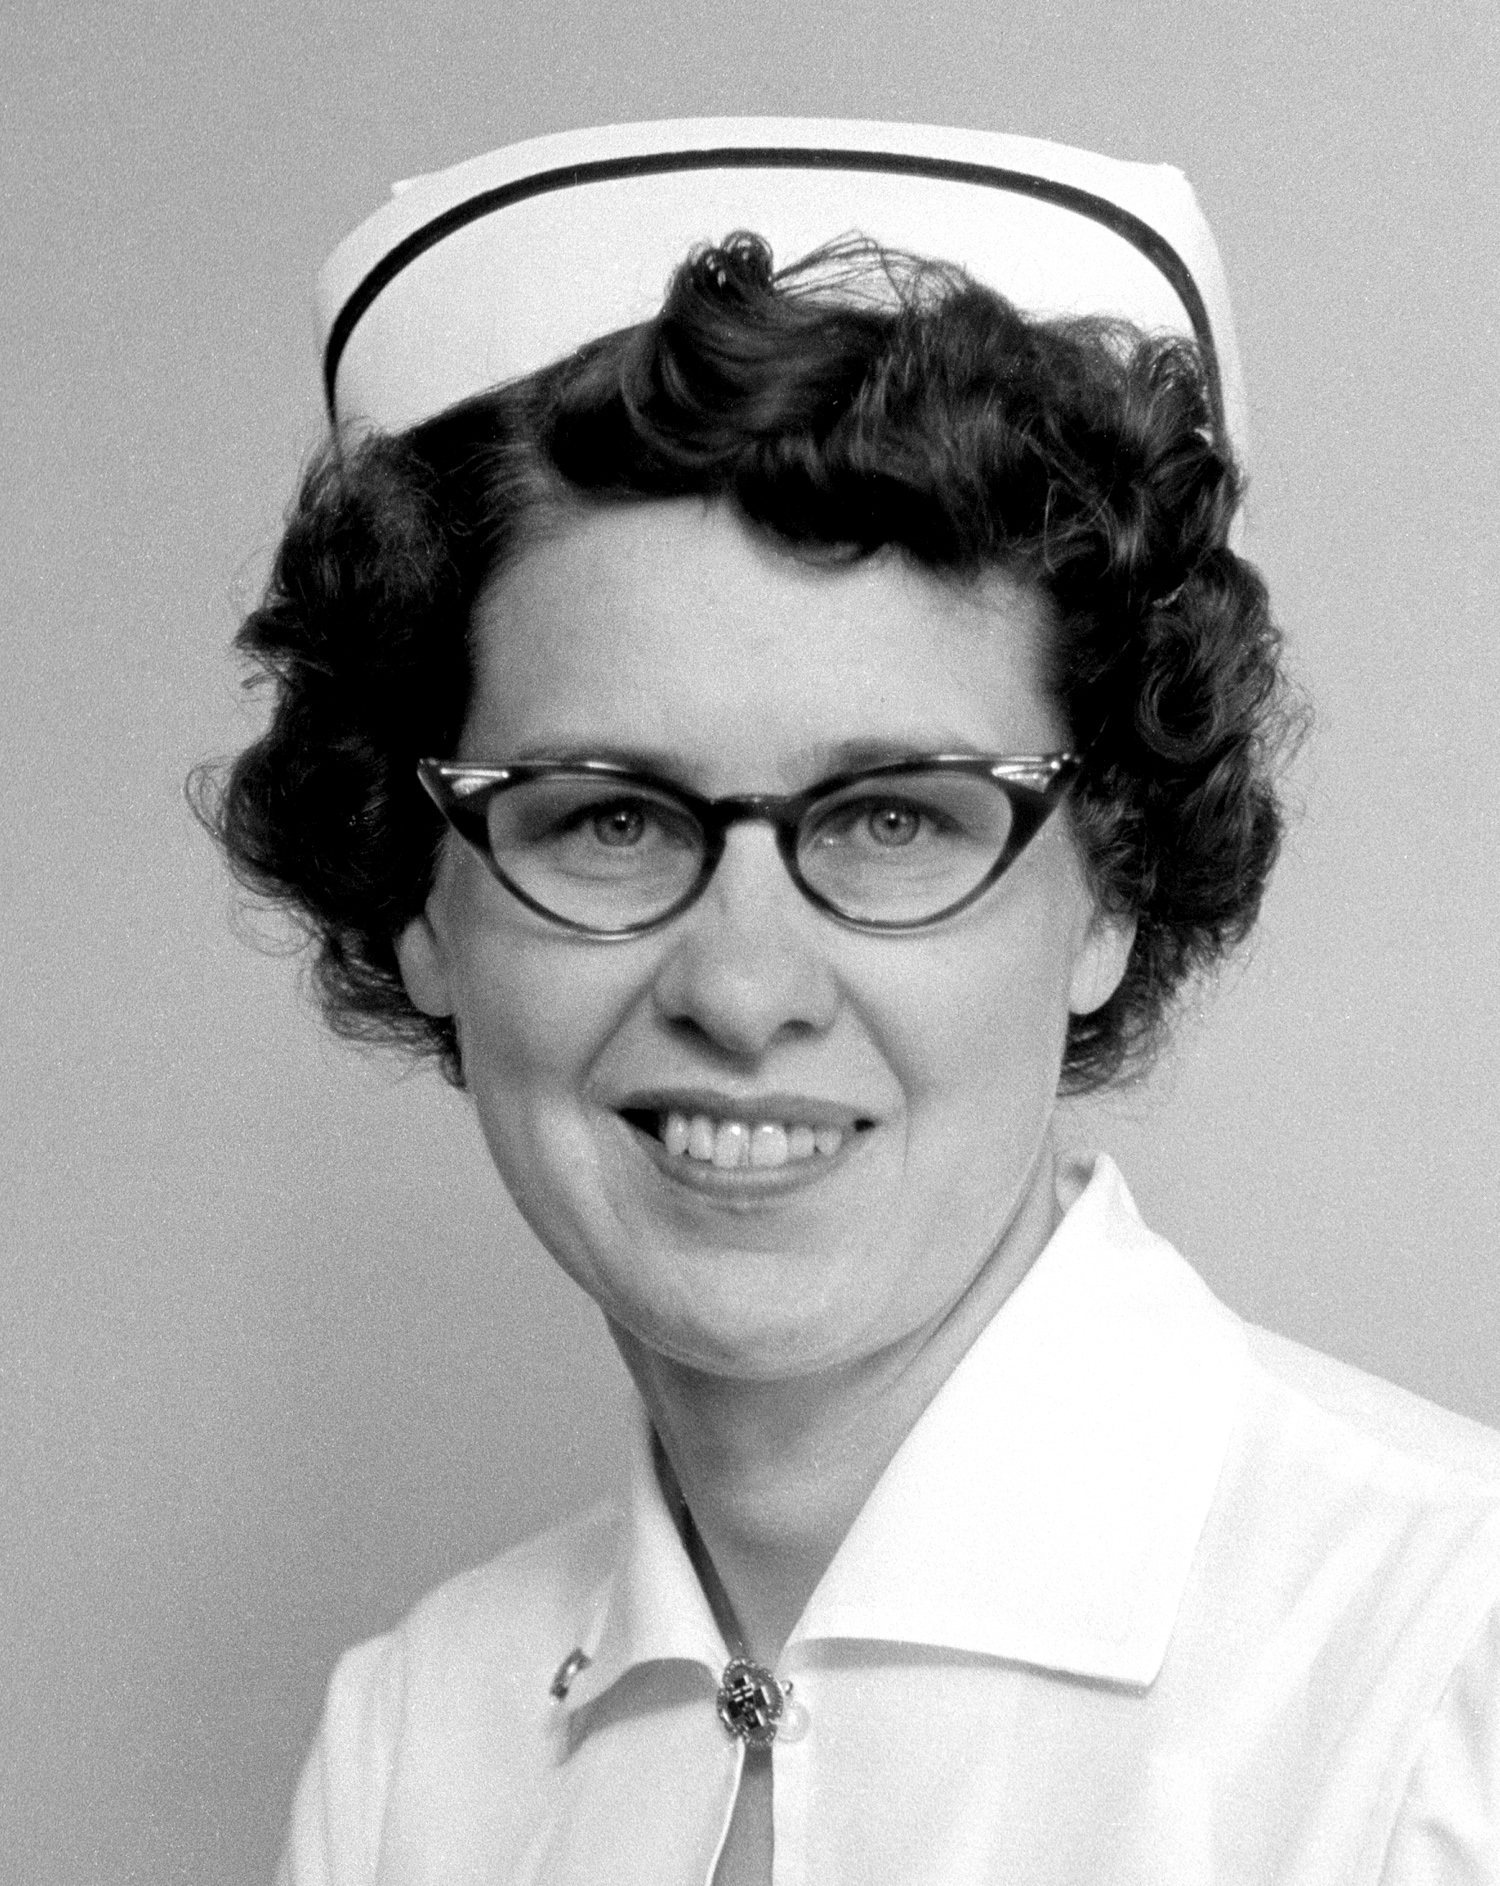 Canadian Nurses Medical Ministry Began With Assignment That Almost